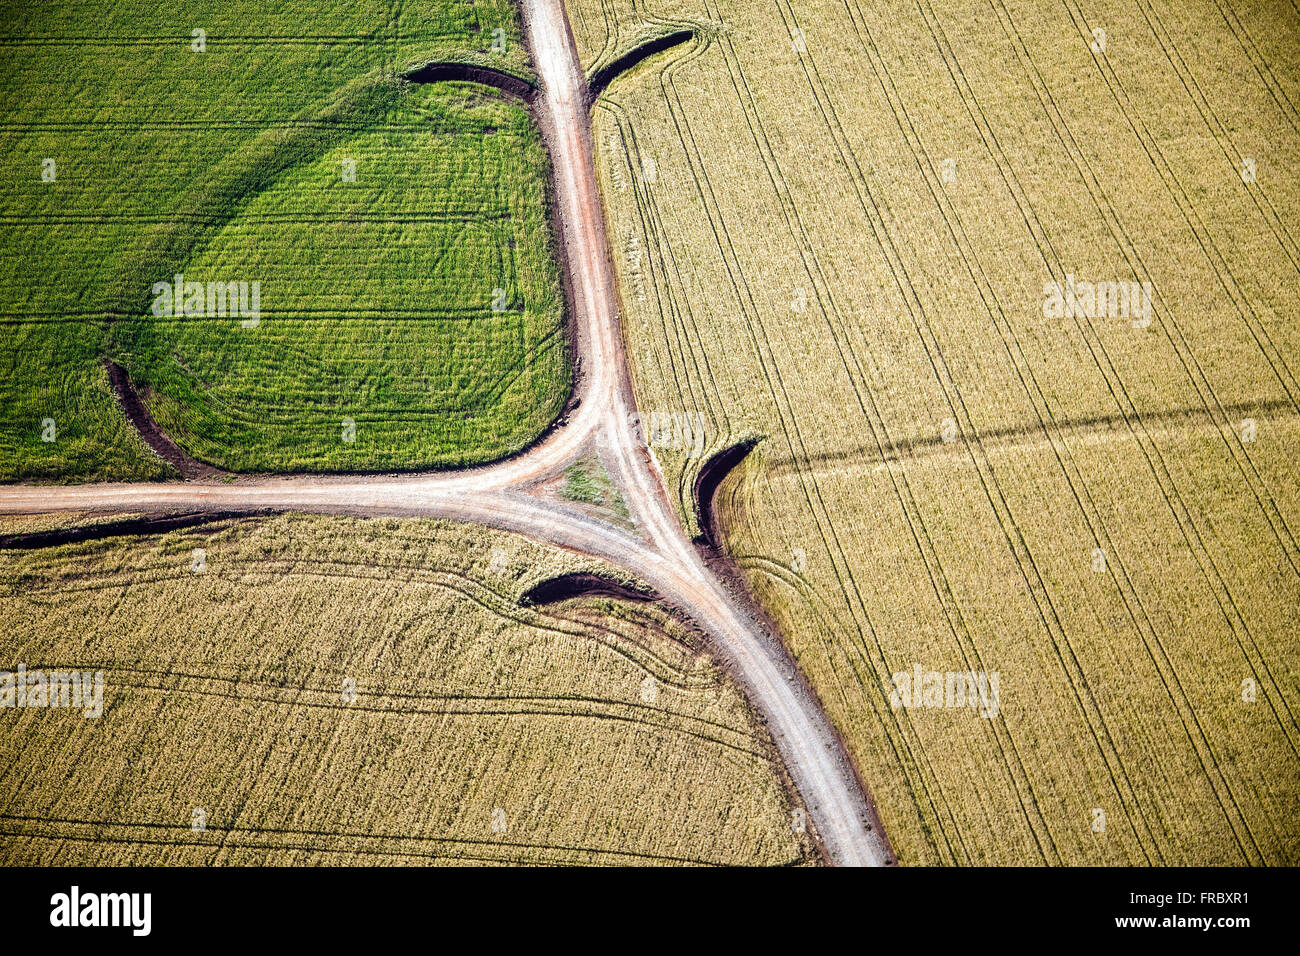 Aerial view of planting wheat Stock Photo